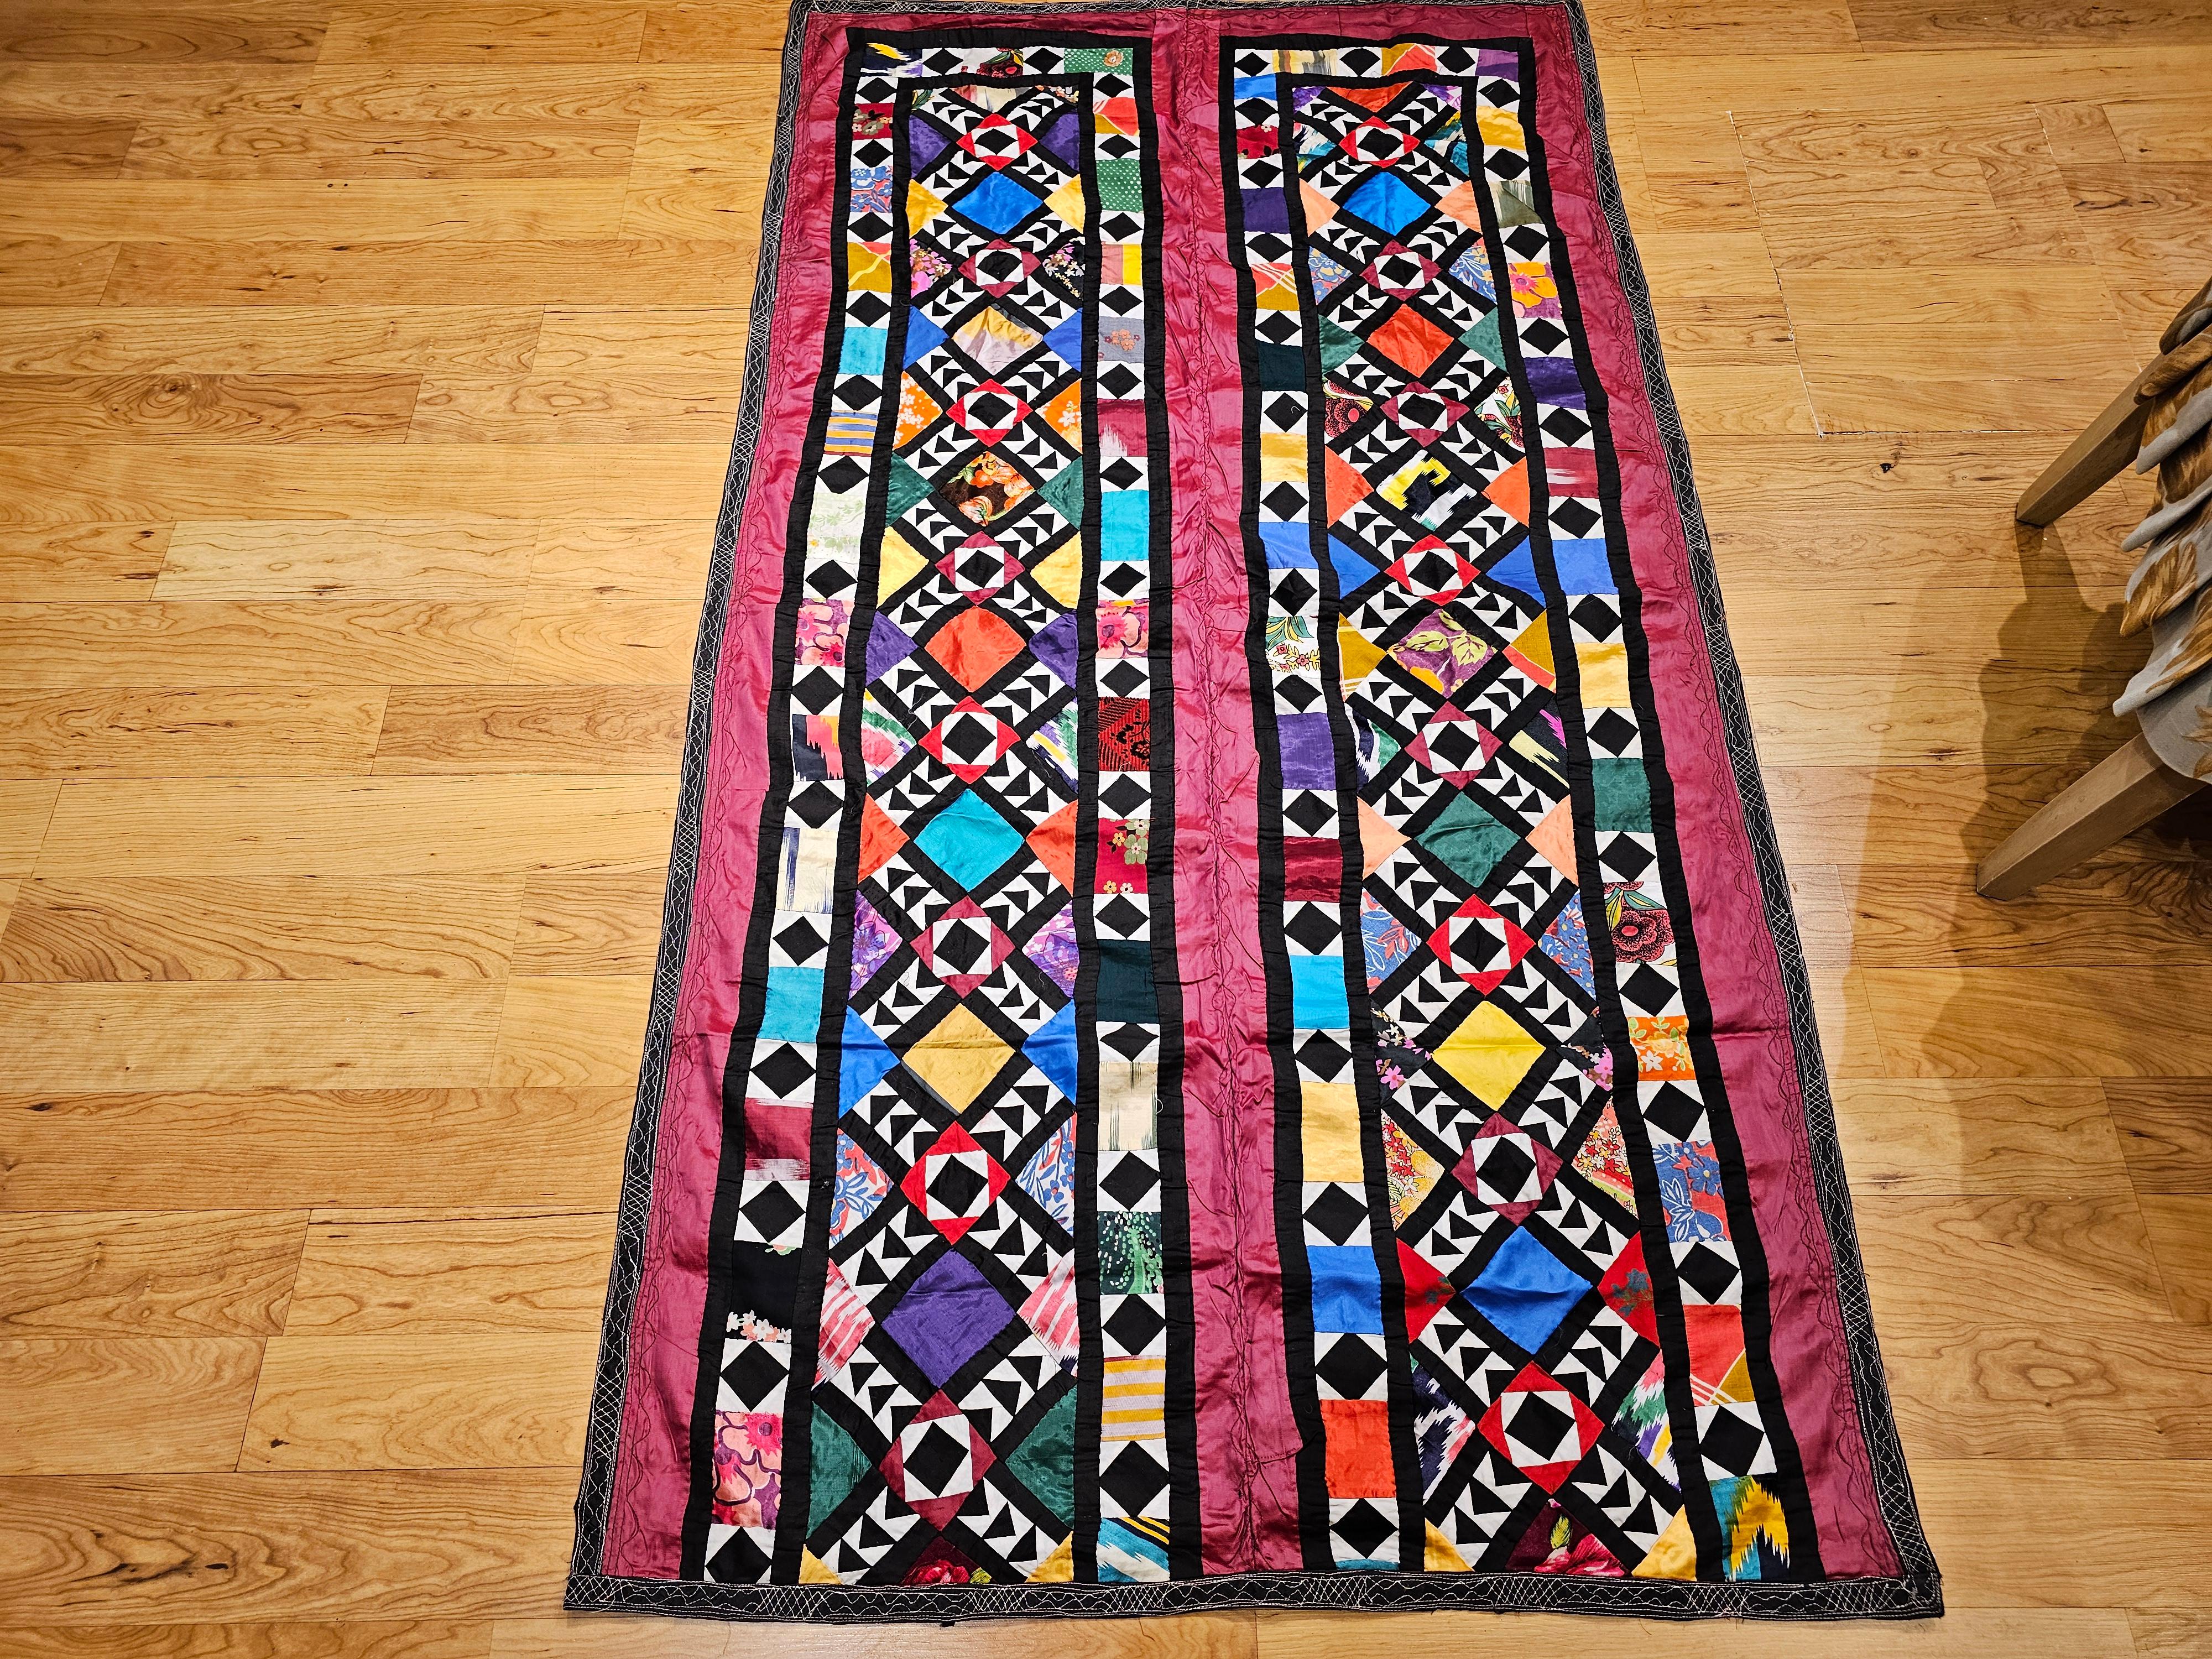 Vintage Uzbek Hand Stitched Silk Quilt in Red, Turquoise, Ivory, Black, Green For Sale 5